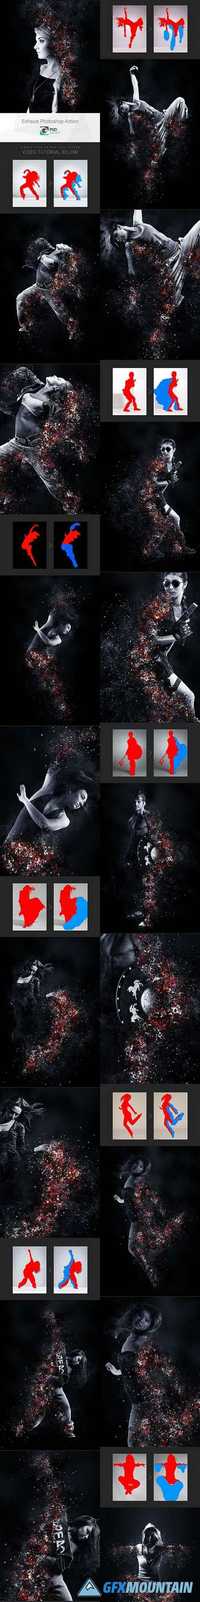 GraphicRiver - Soot 2 Photoshop Action 18611201